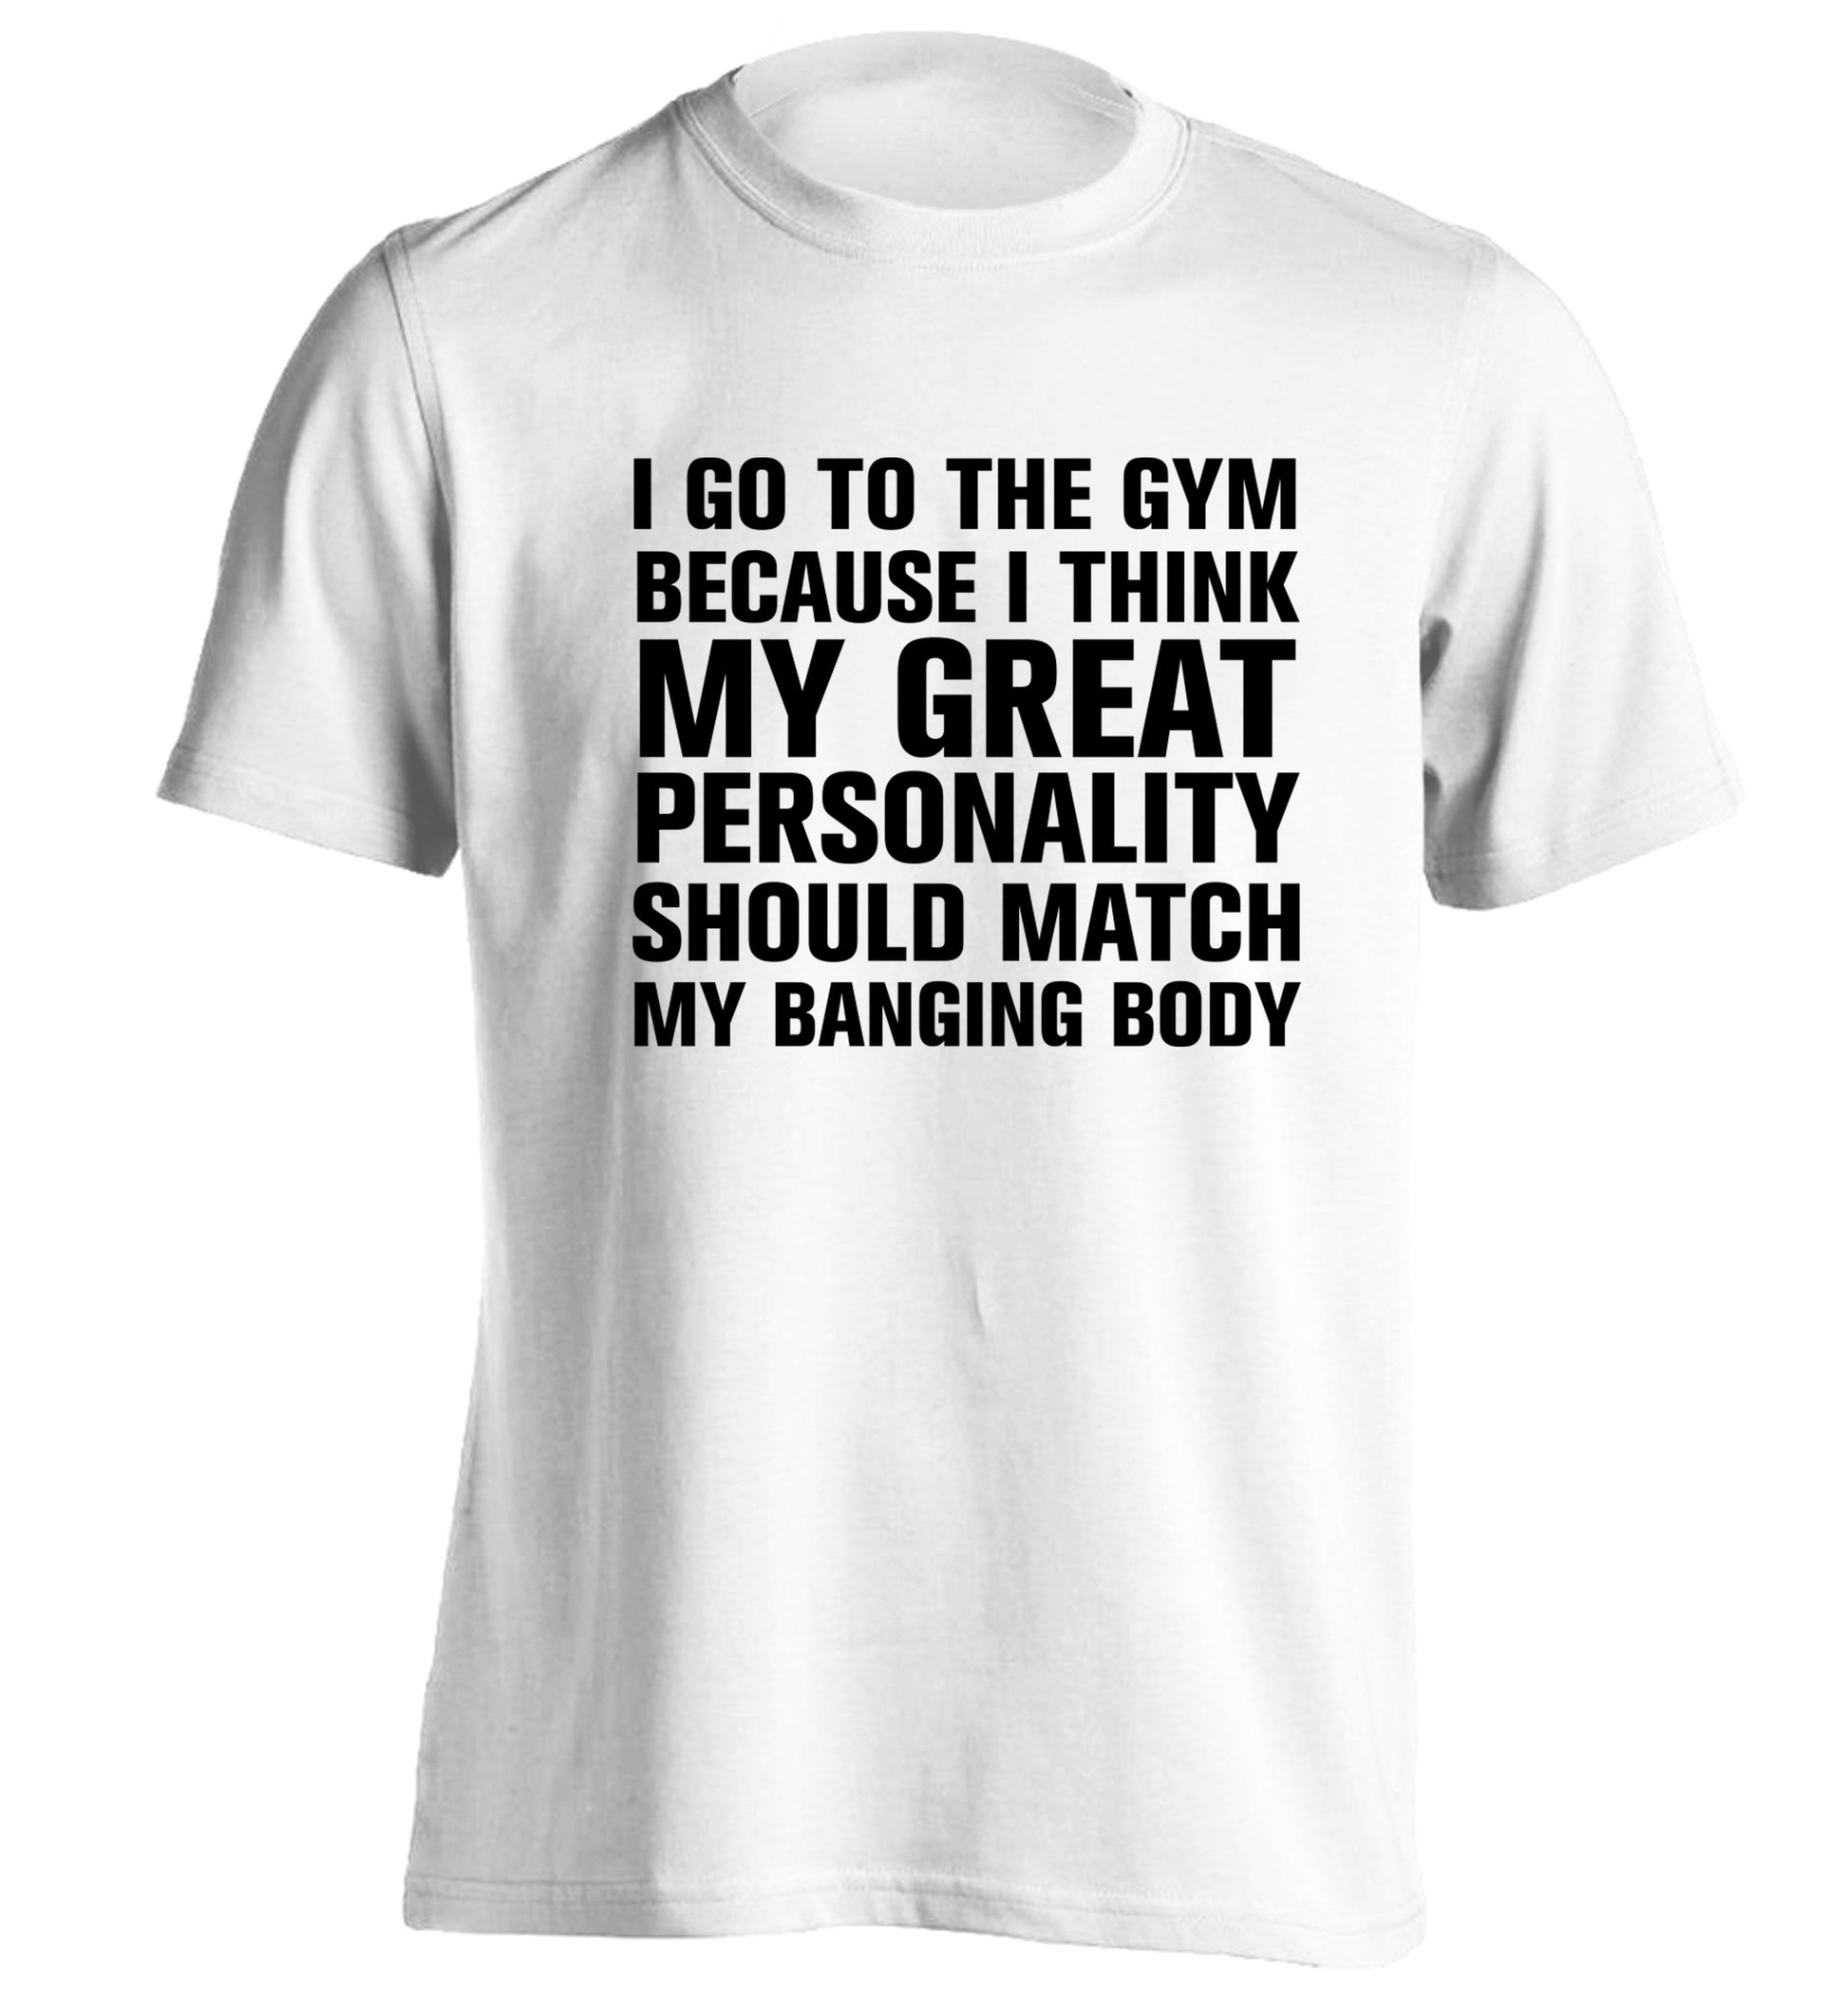 I go to the gym because I think my great personality should match my banging body adults unisex white Tshirt 2XL